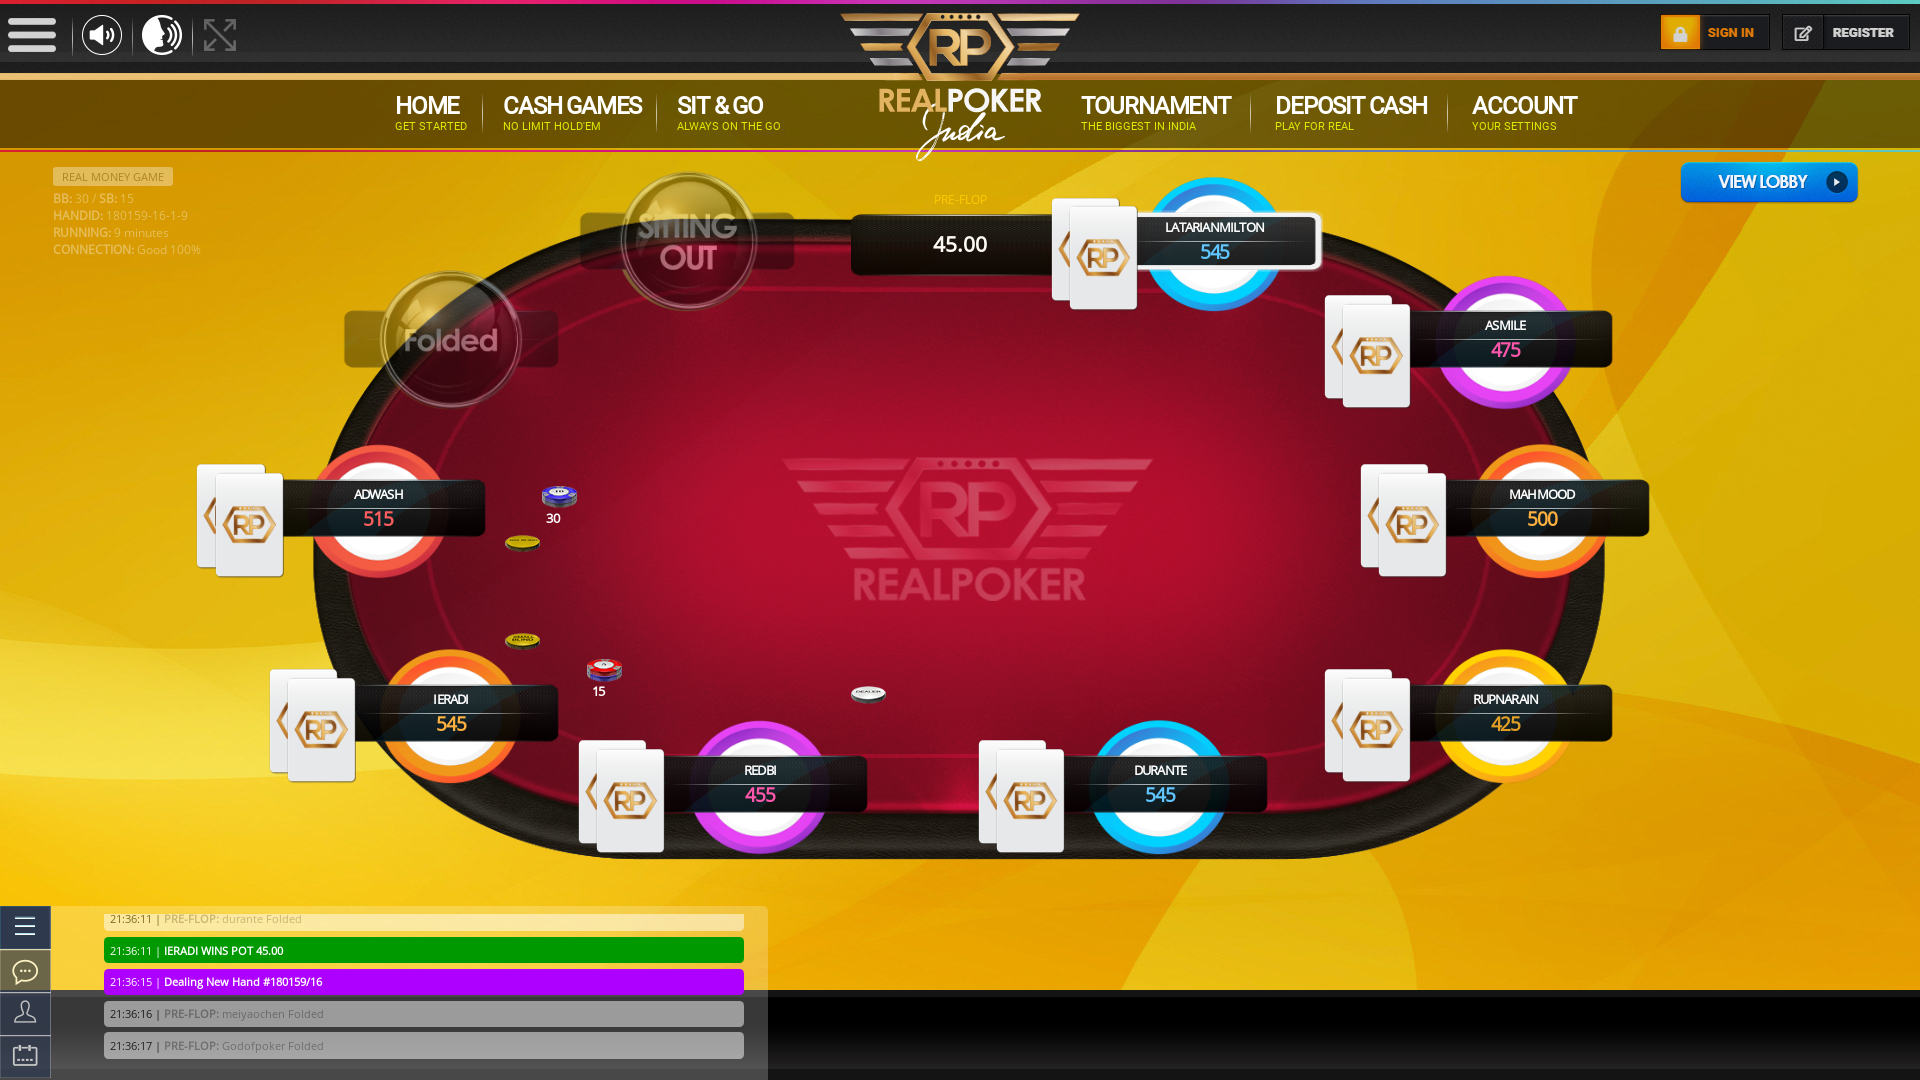 Indian online poker on a 10 player table in the 9th minute match up